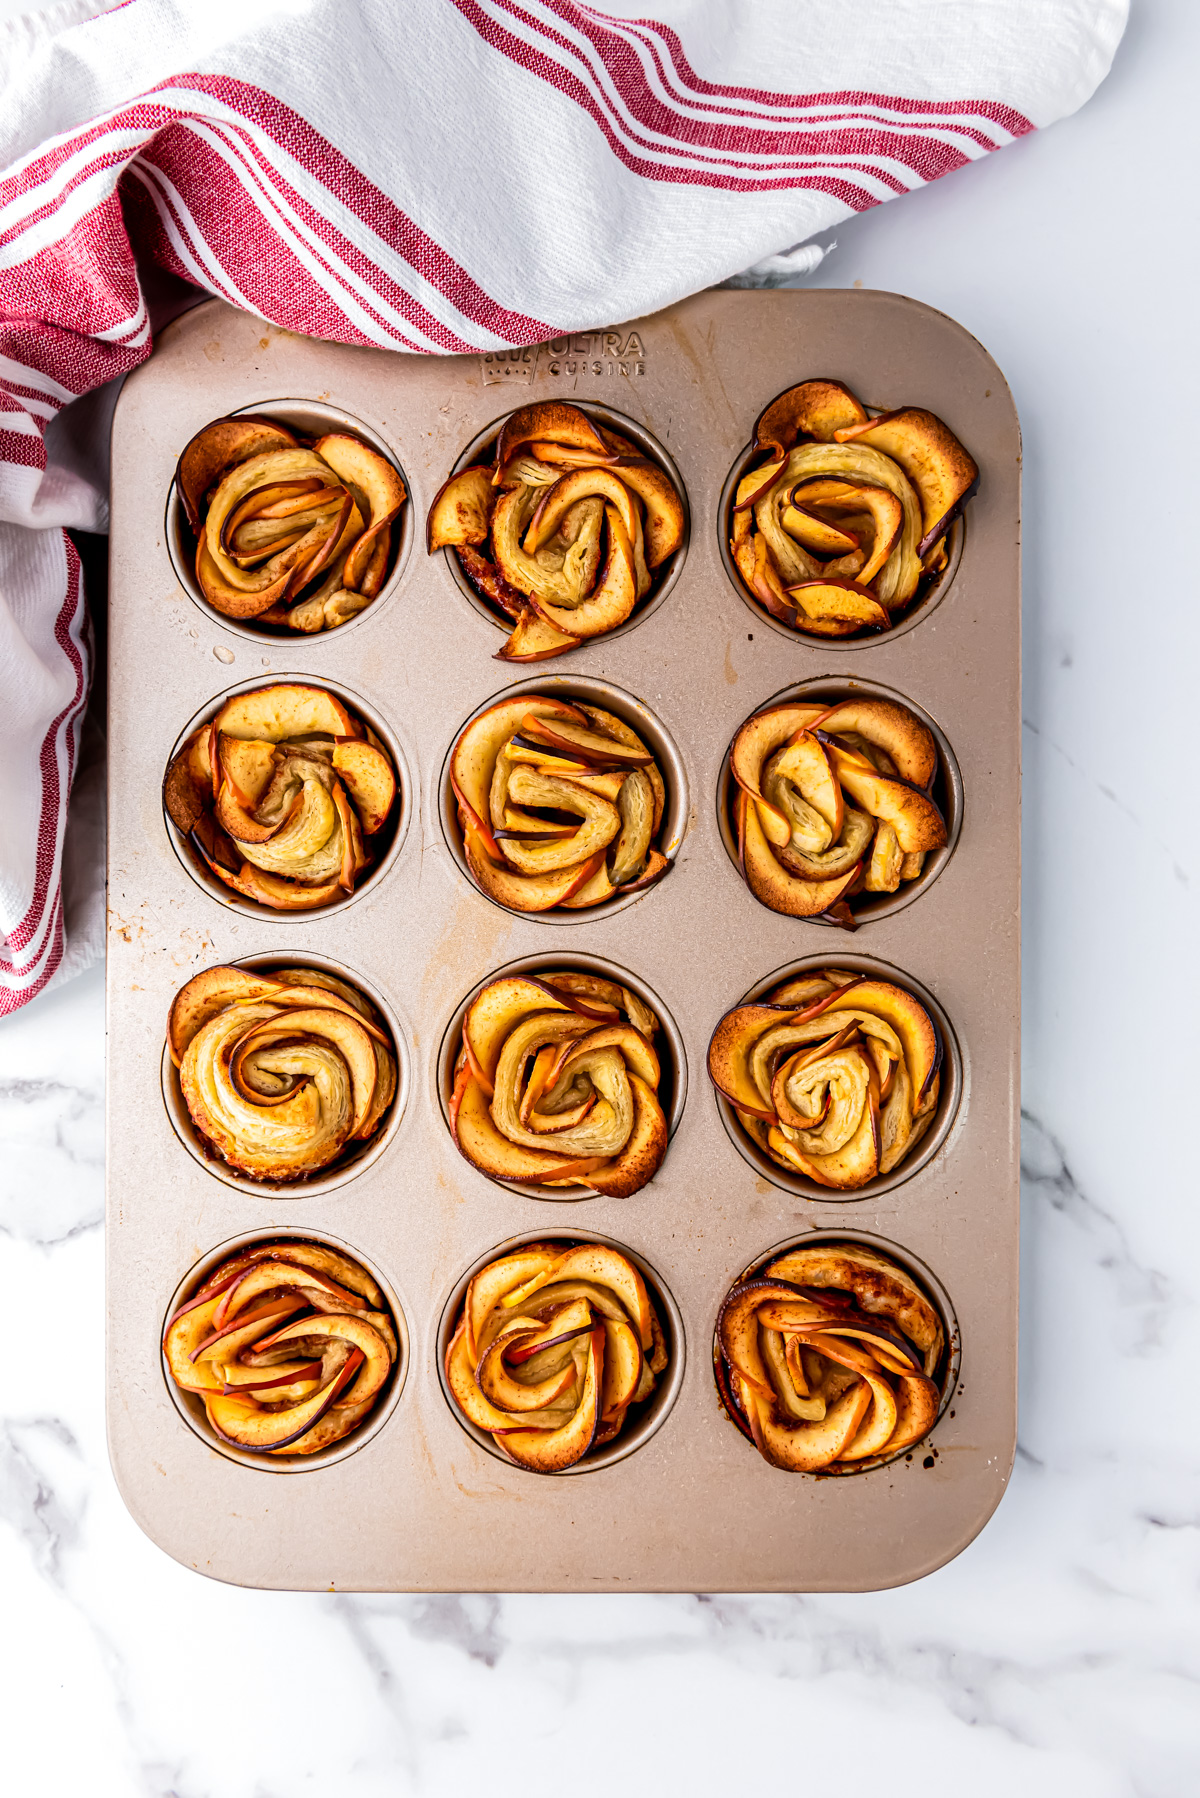 Apple Roses that have been baked in a muffin tin.